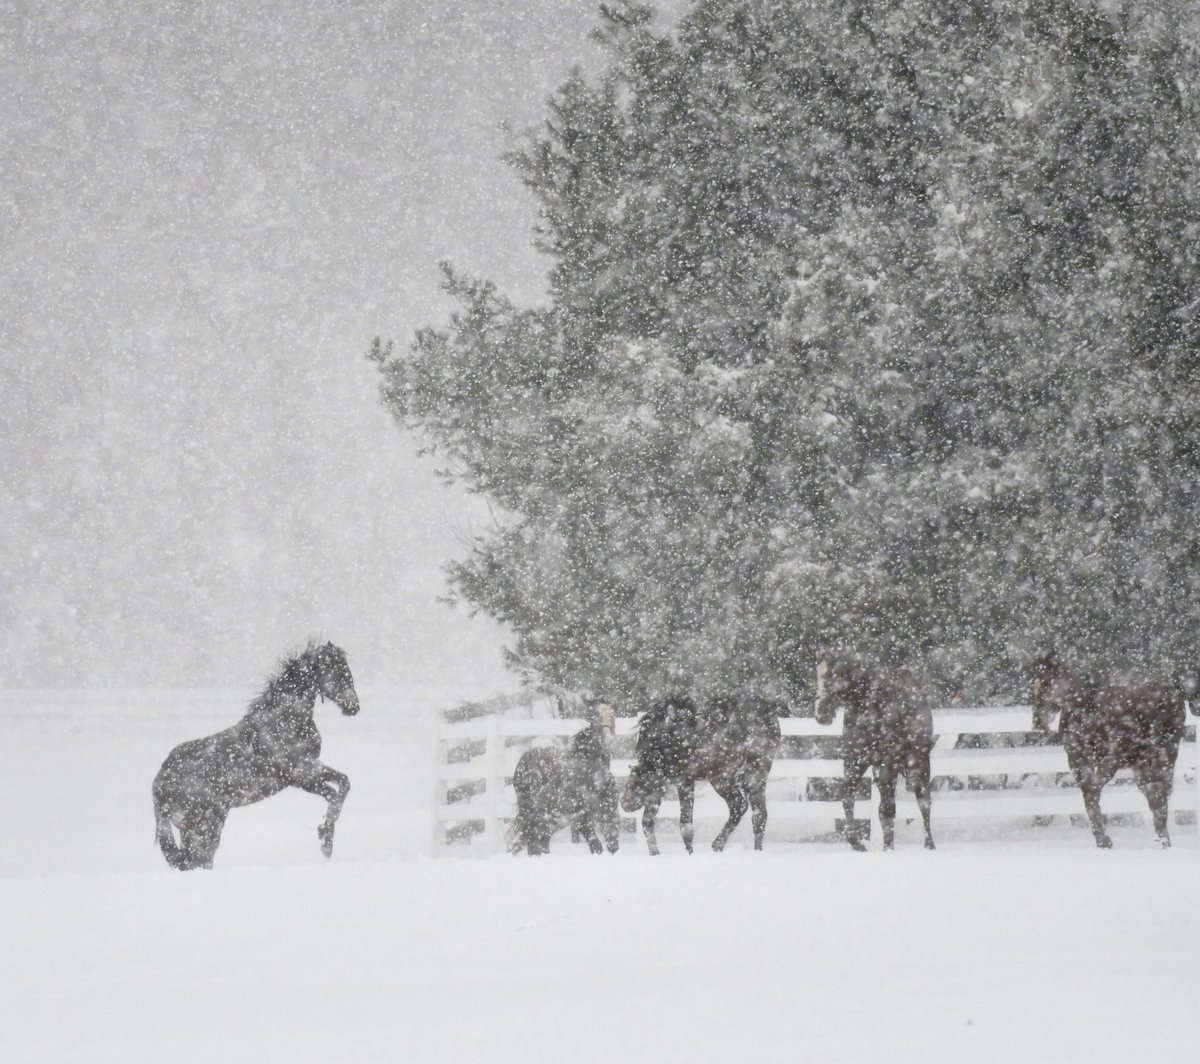 Yearlings at Song Hill Farm enjoy the #Snowstorm2018 that has occurred in #SaratogaCounty NY. @NWSAlbany @SaratogaChamber @NikonUSA #518wx